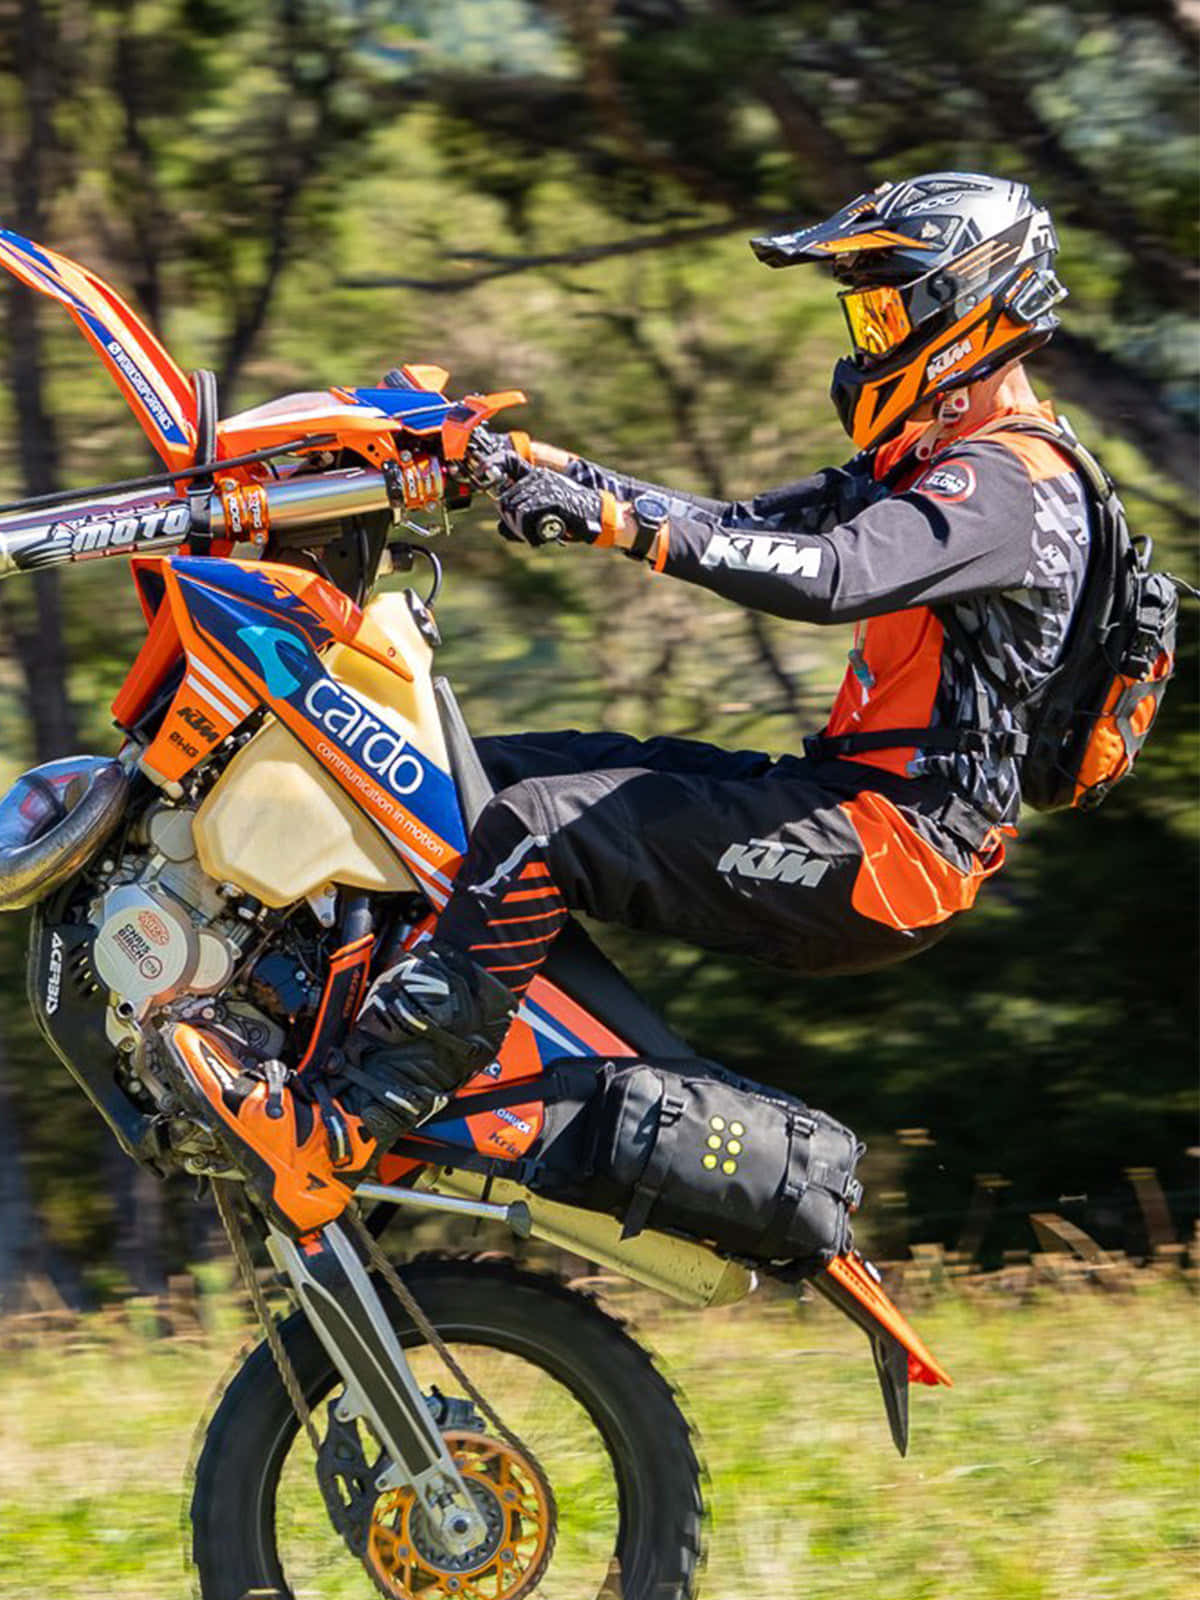 Rider climbing a challenging slope on a dirtbike